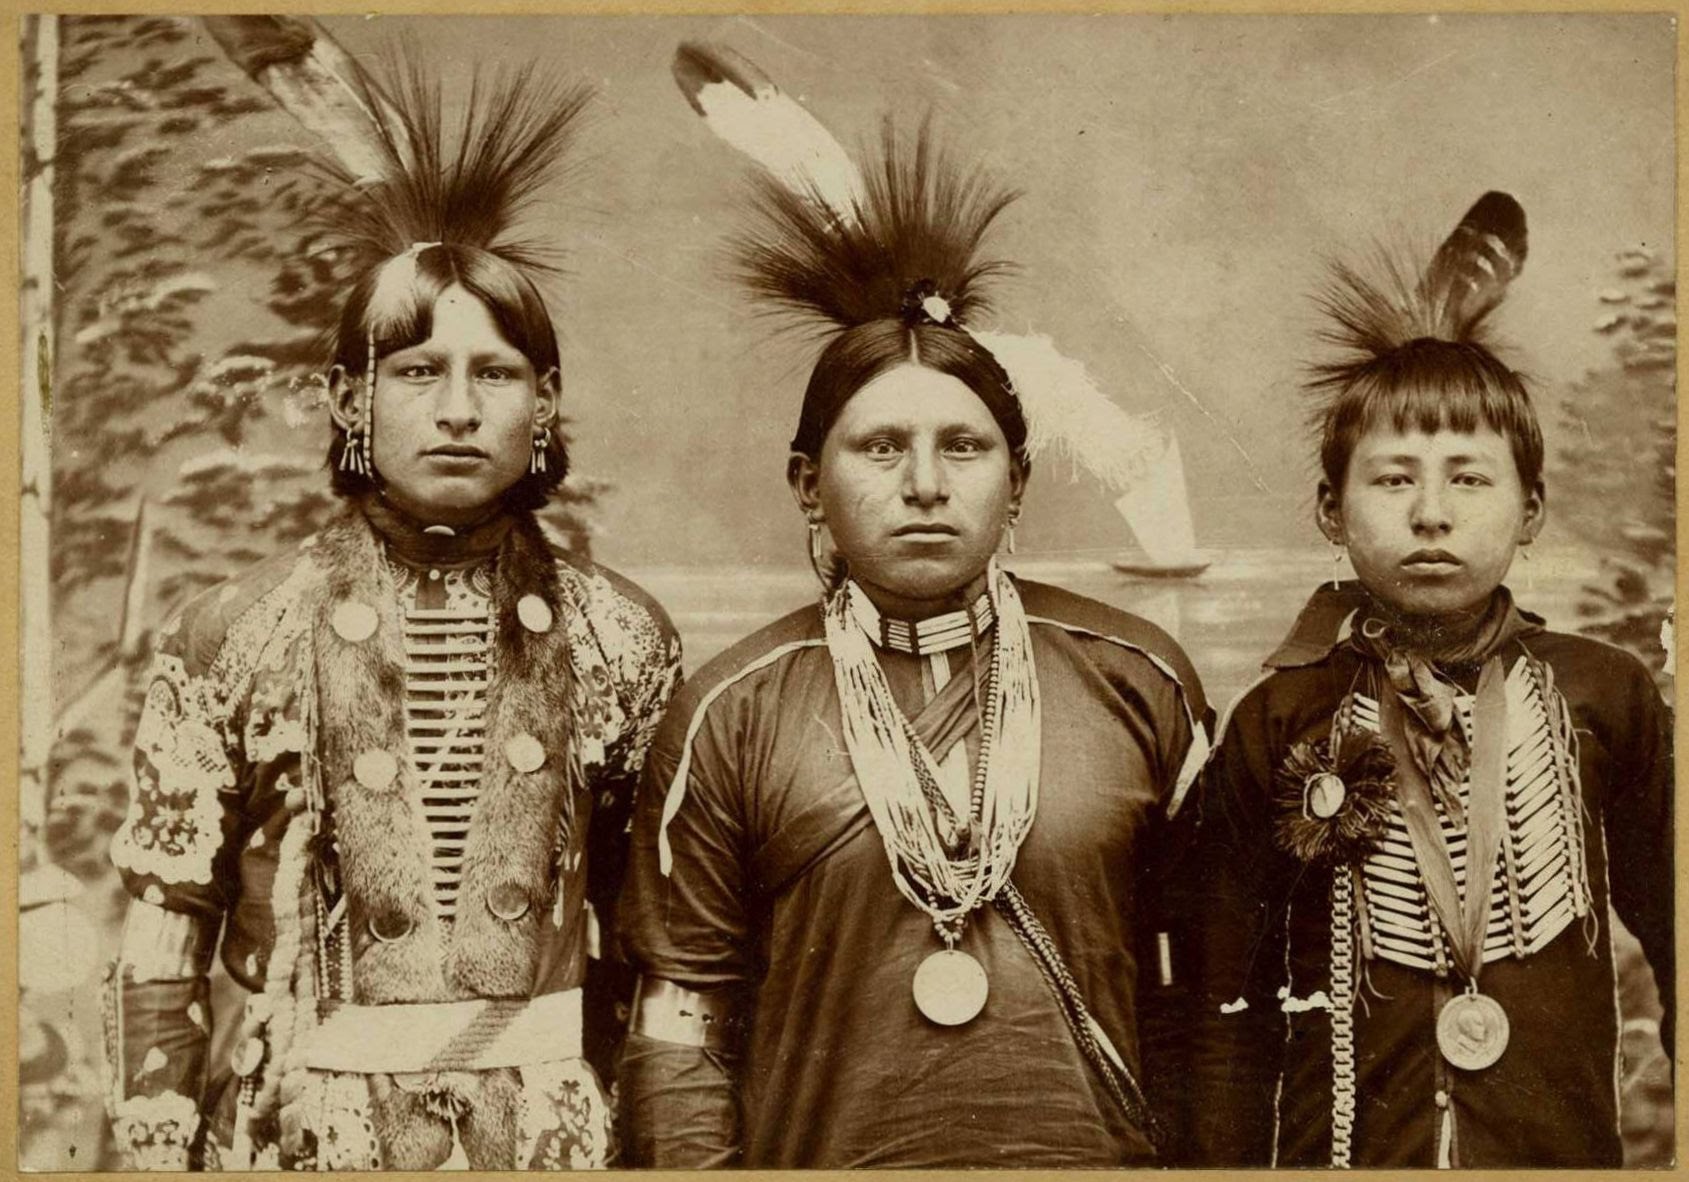 THE TRUTH OF NATIVE AMERICANS BEFORE THE GENOCIDE